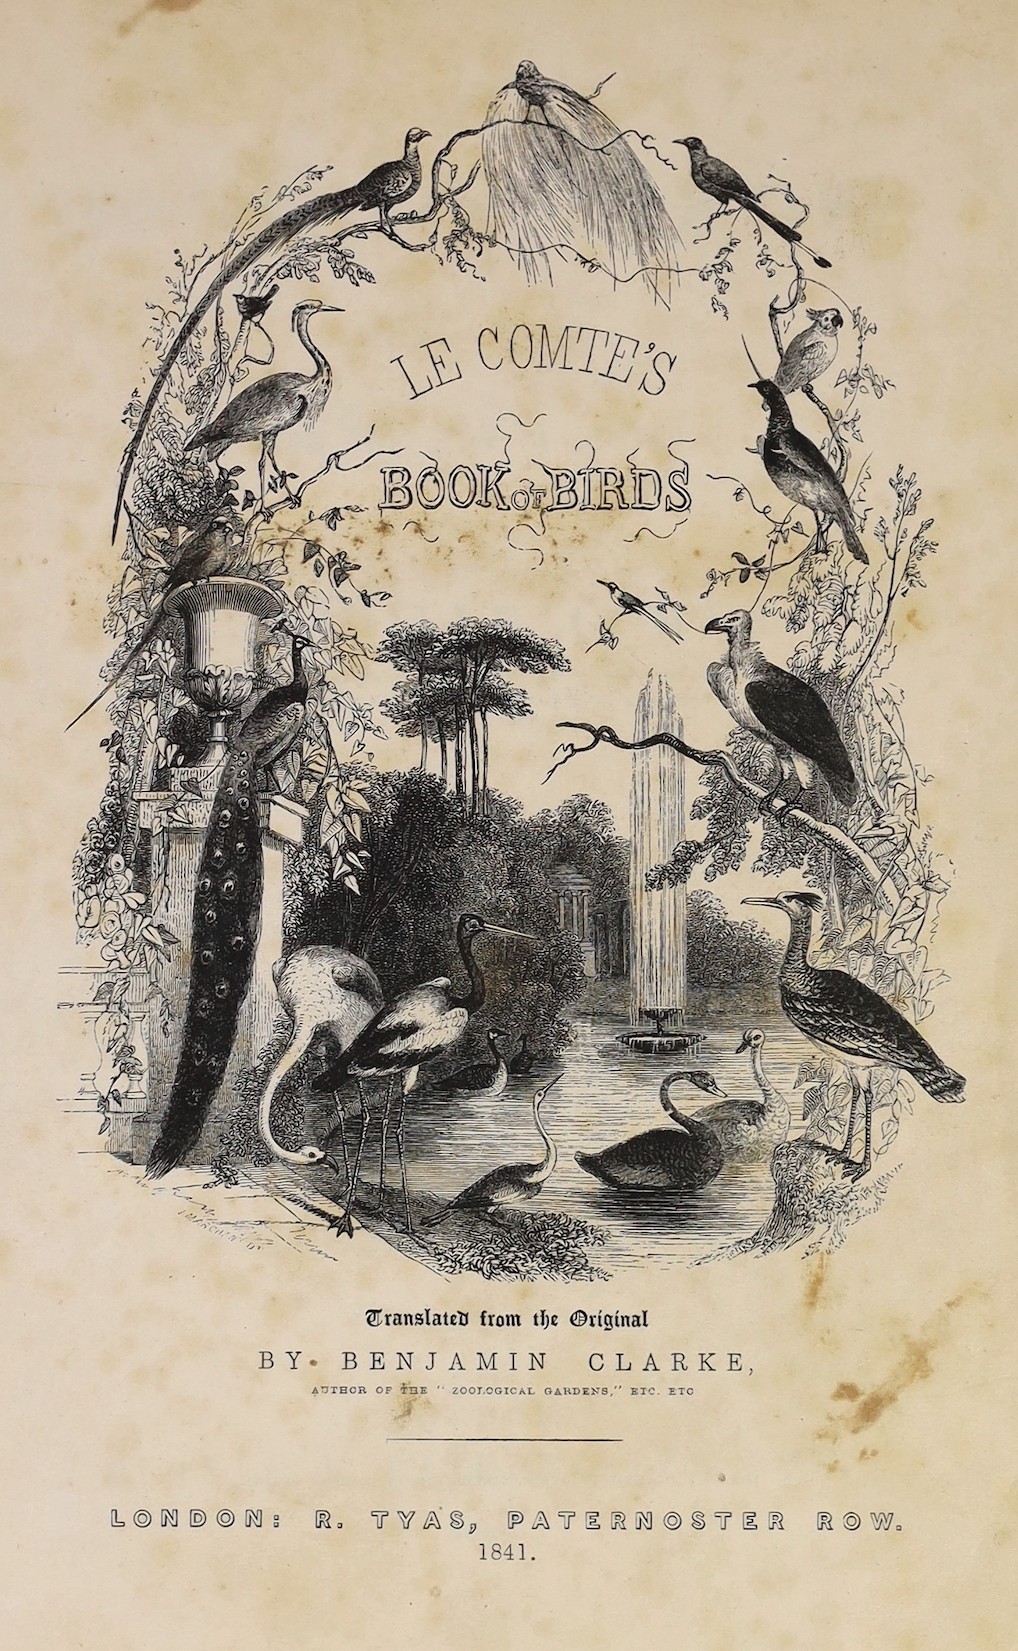 Comte, Achille - The Book of Birds: edited and abridged from the text of Buffon. Translated from the original by Benjamin Clarke. engraved pictorial and printed titles, 38 hand coloured plates (by Victor Adams); contemp.